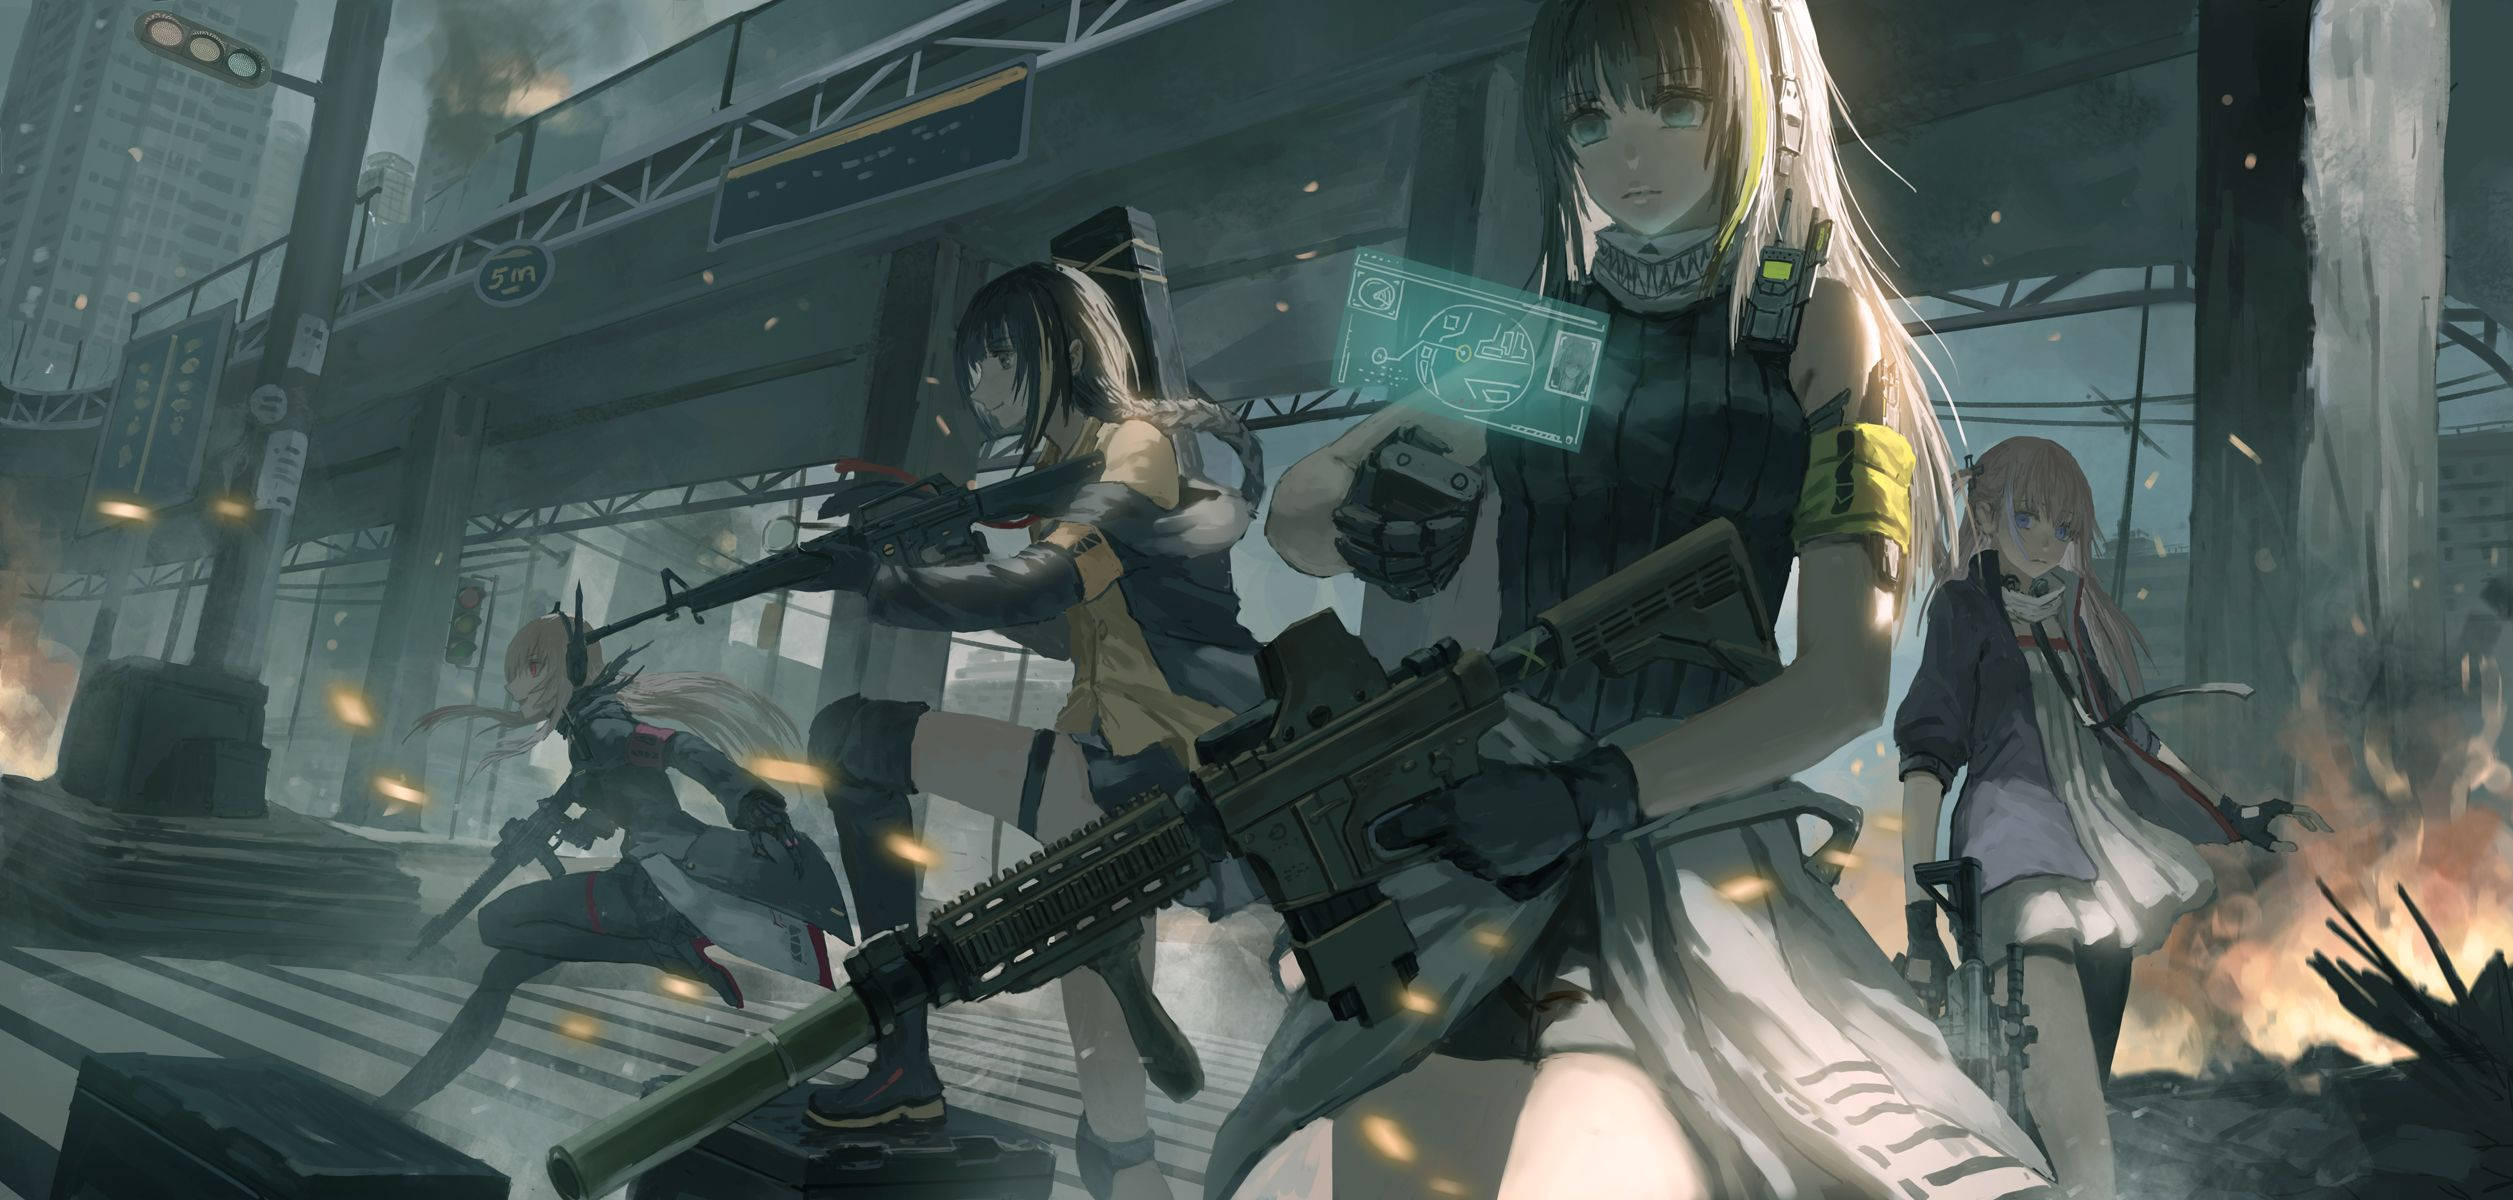 M16a1 Of Girls Frontline Background